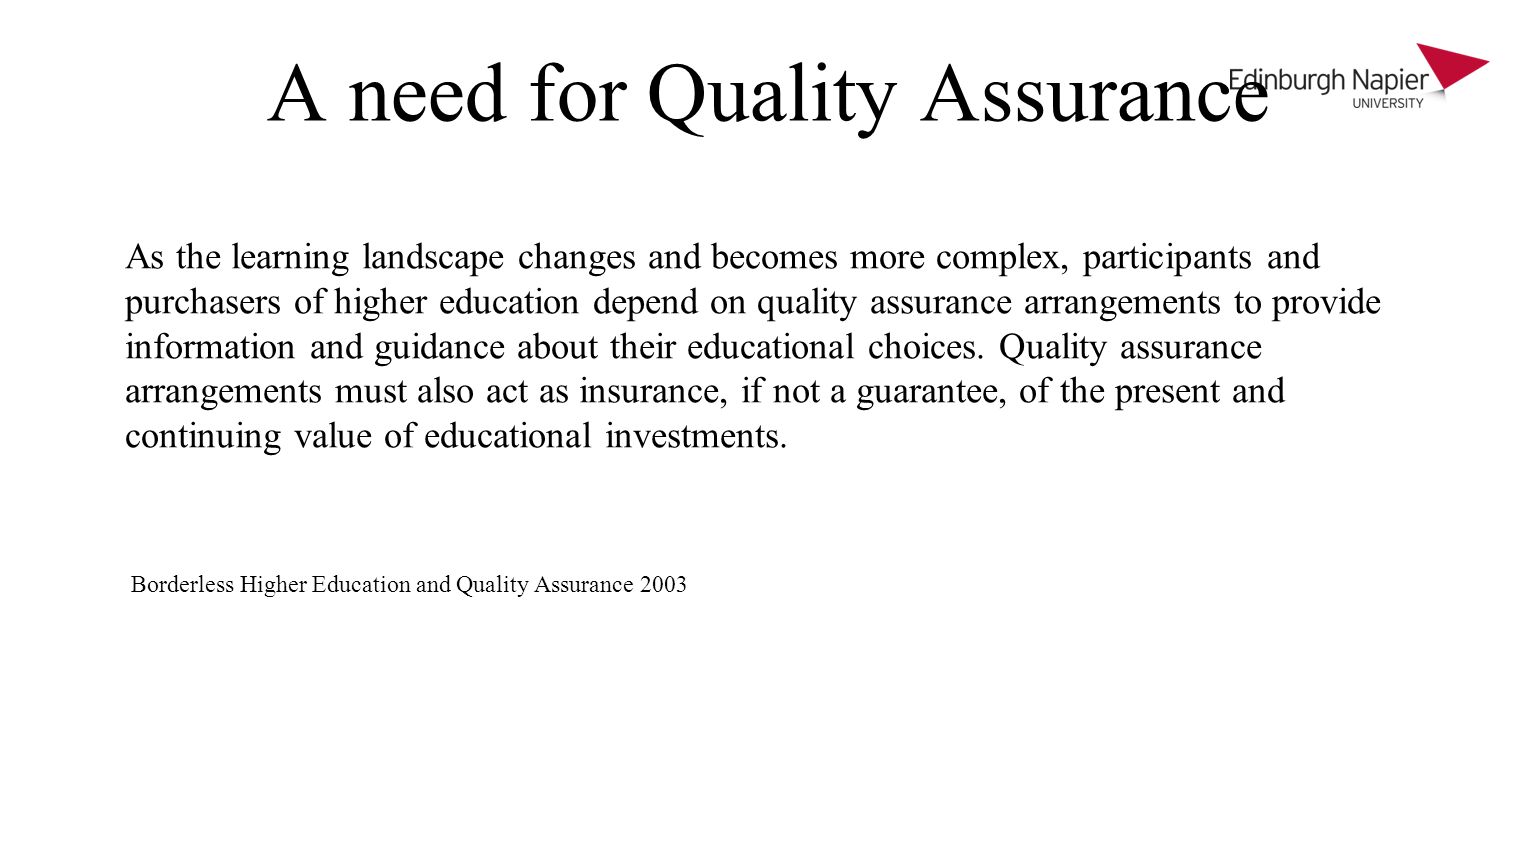 A need for Quality Assurance As the learning landscape changes and becomes more complex, participants and purchasers of higher education depend on quality assurance arrangements to provide information and guidance about their educational choices.